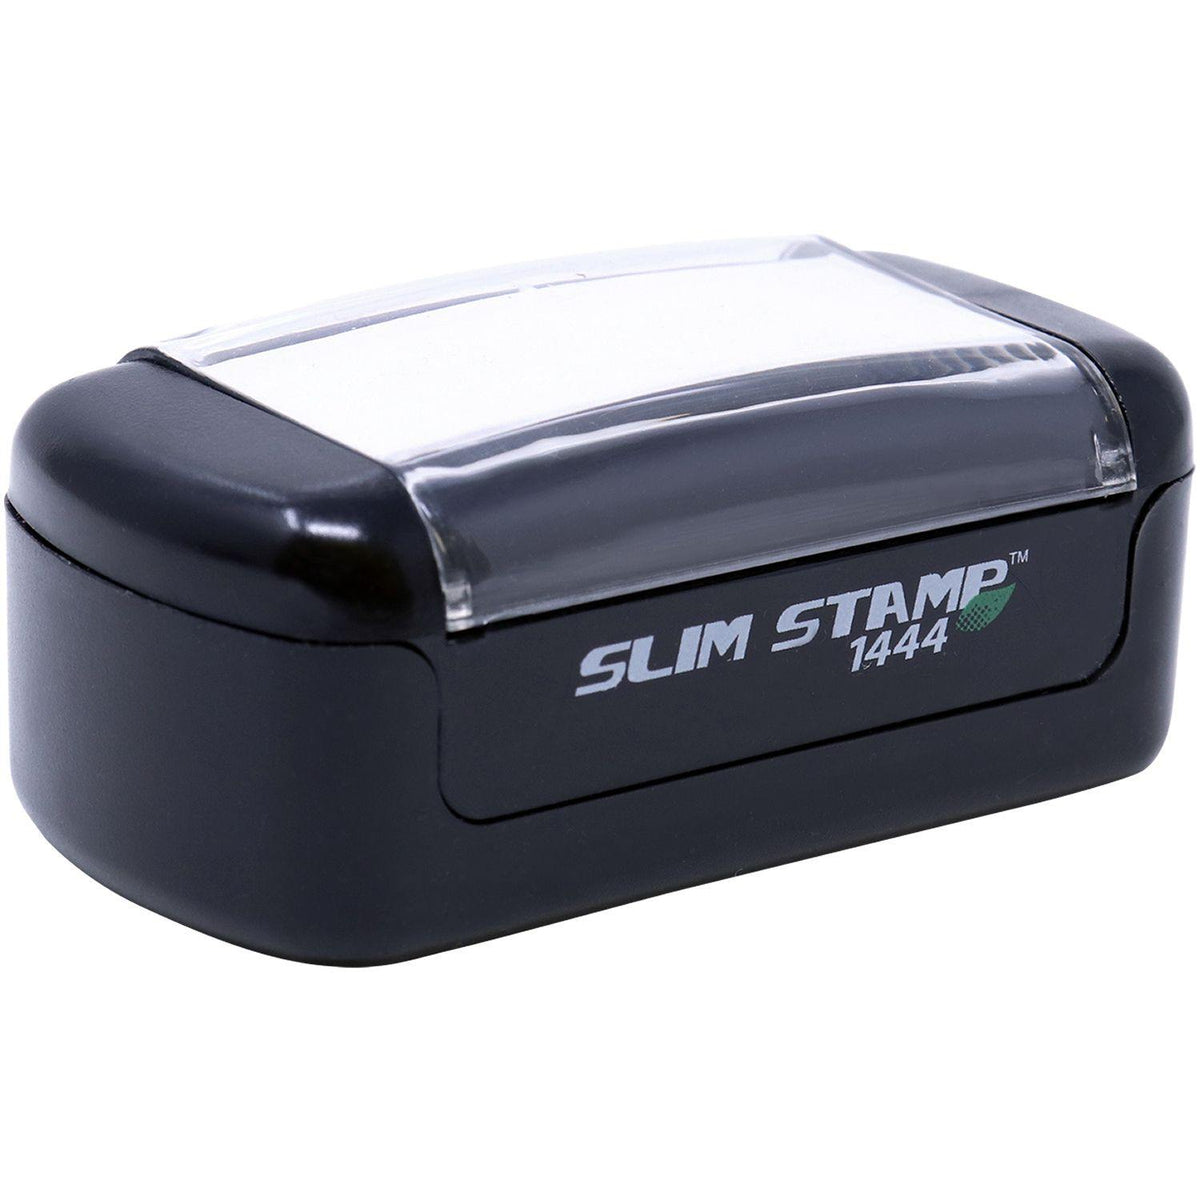 Alt View of Slim Pre Inked Good Thinking Stamp Mount Angle